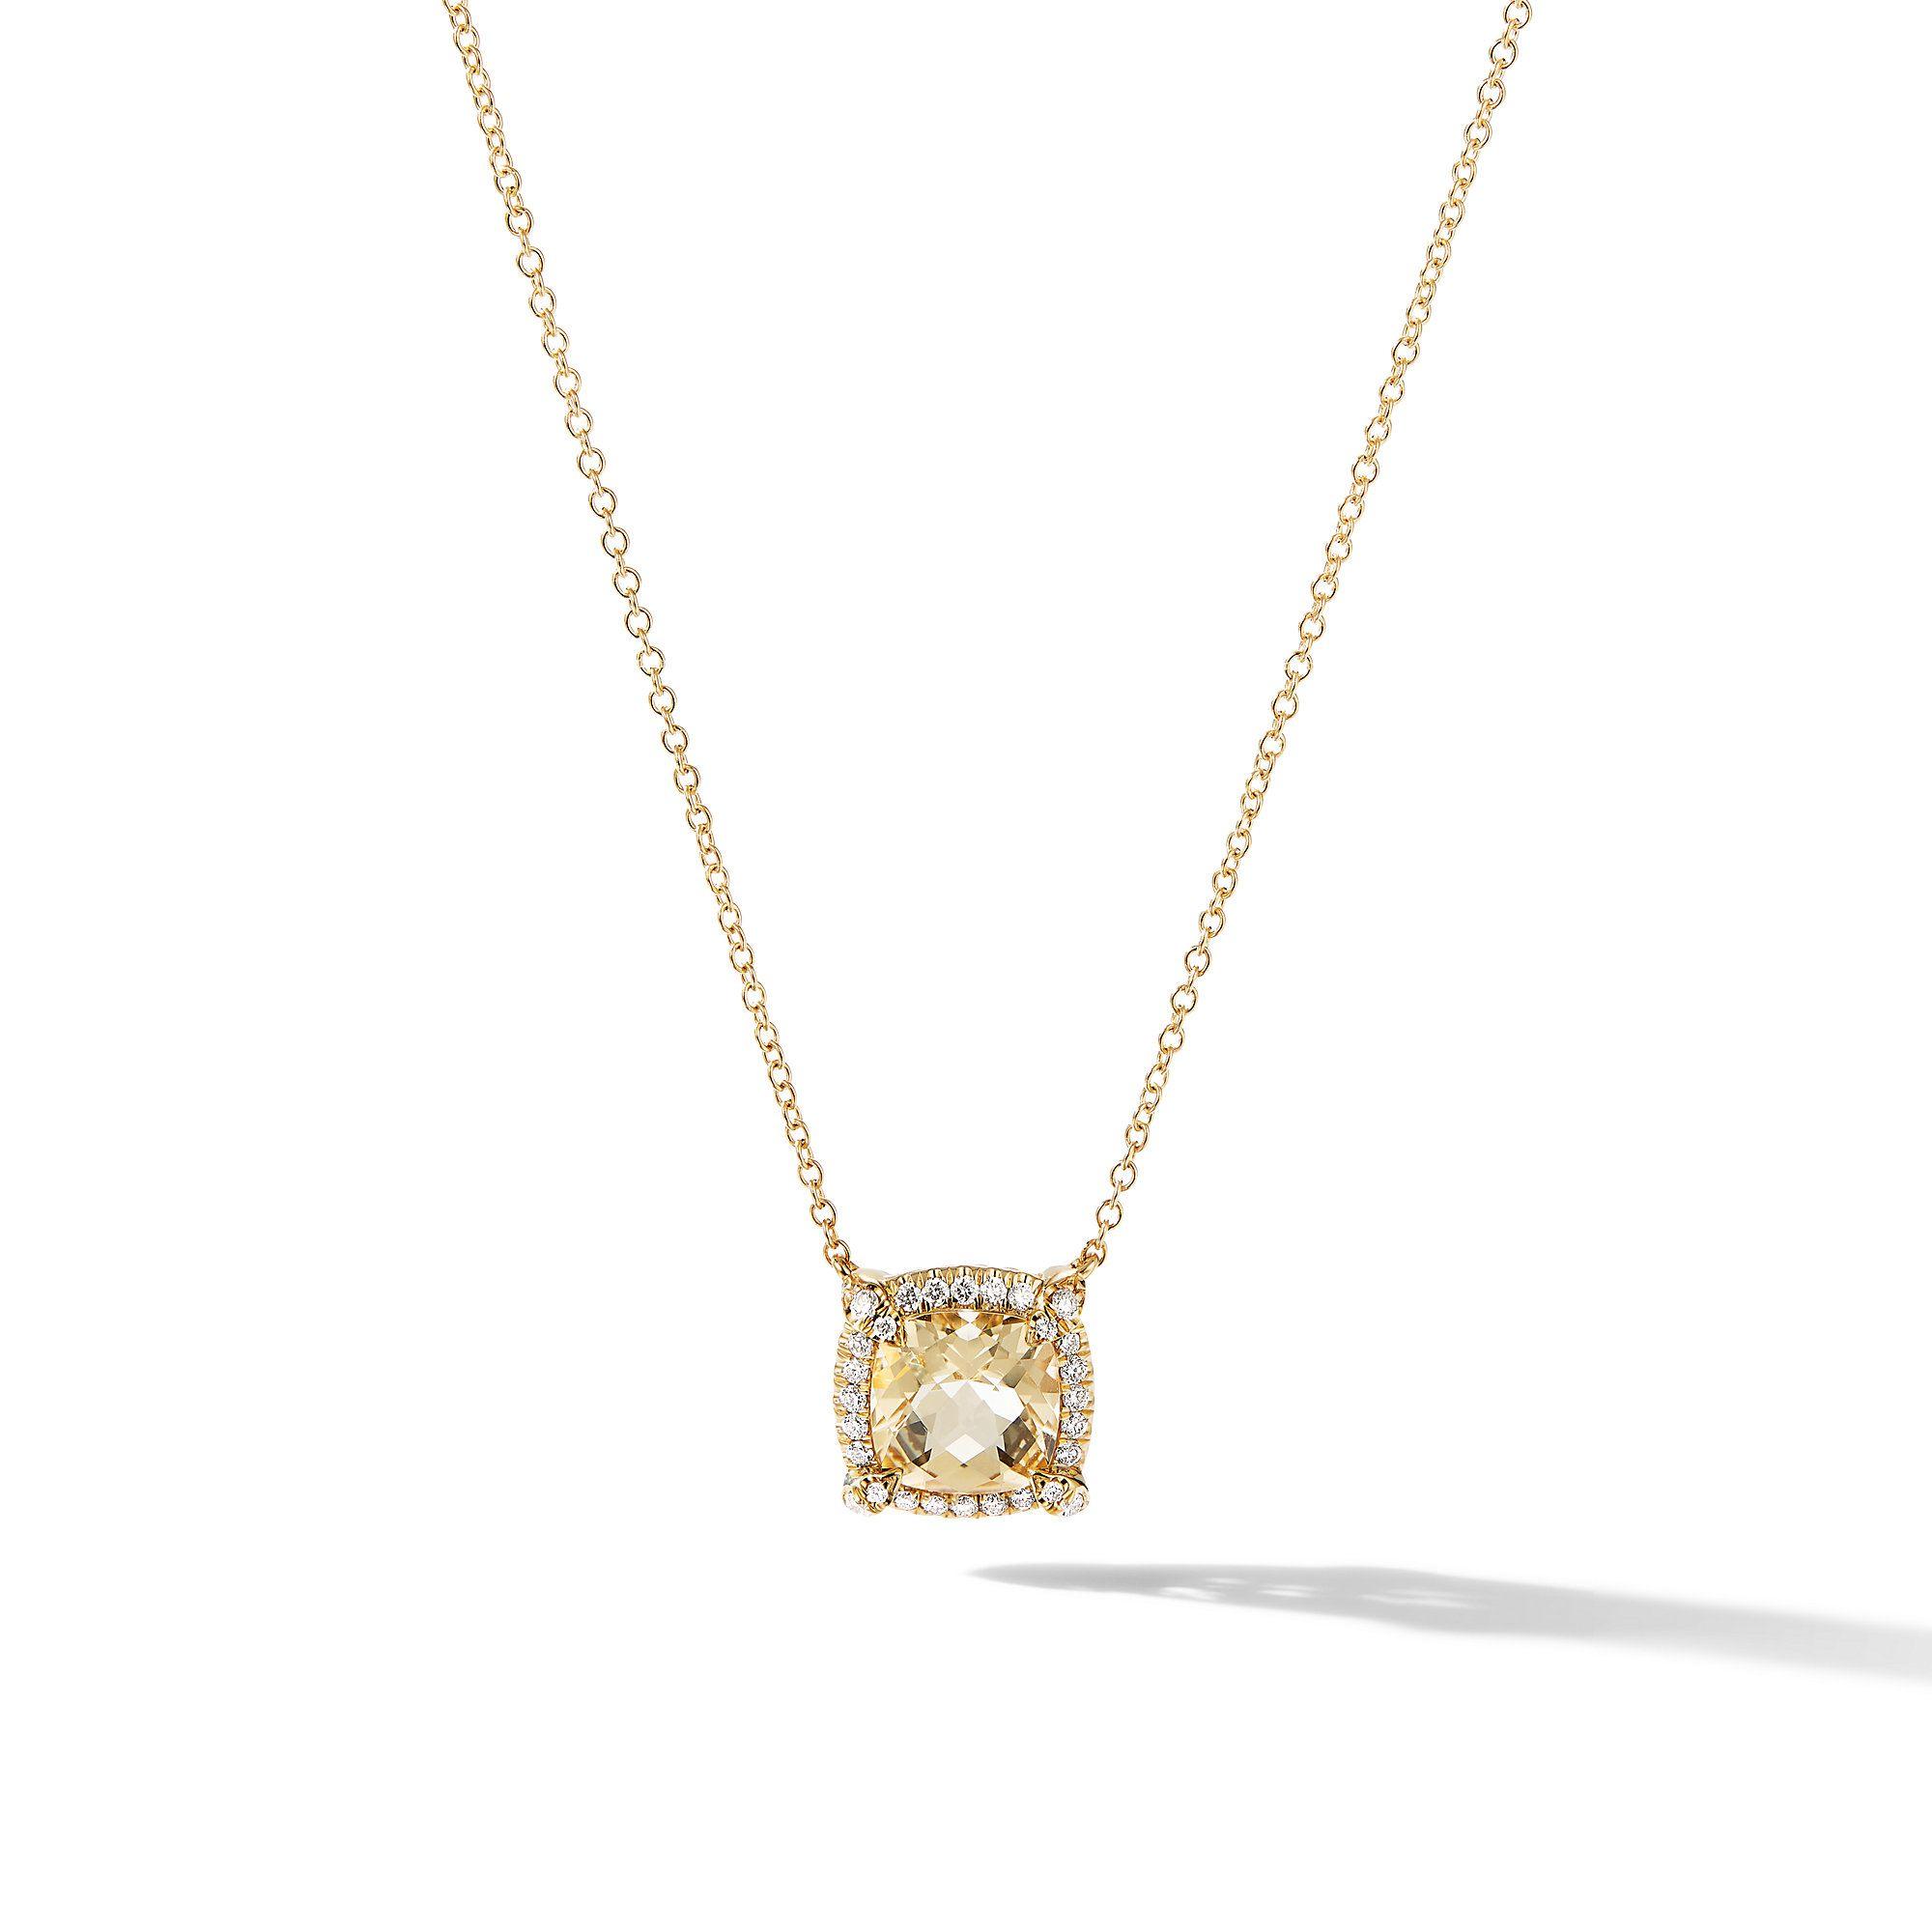 David Yurman Petite Chatelaine Pave Bezel Pendant Necklace in Gold with Champagne Citrine and Diamond